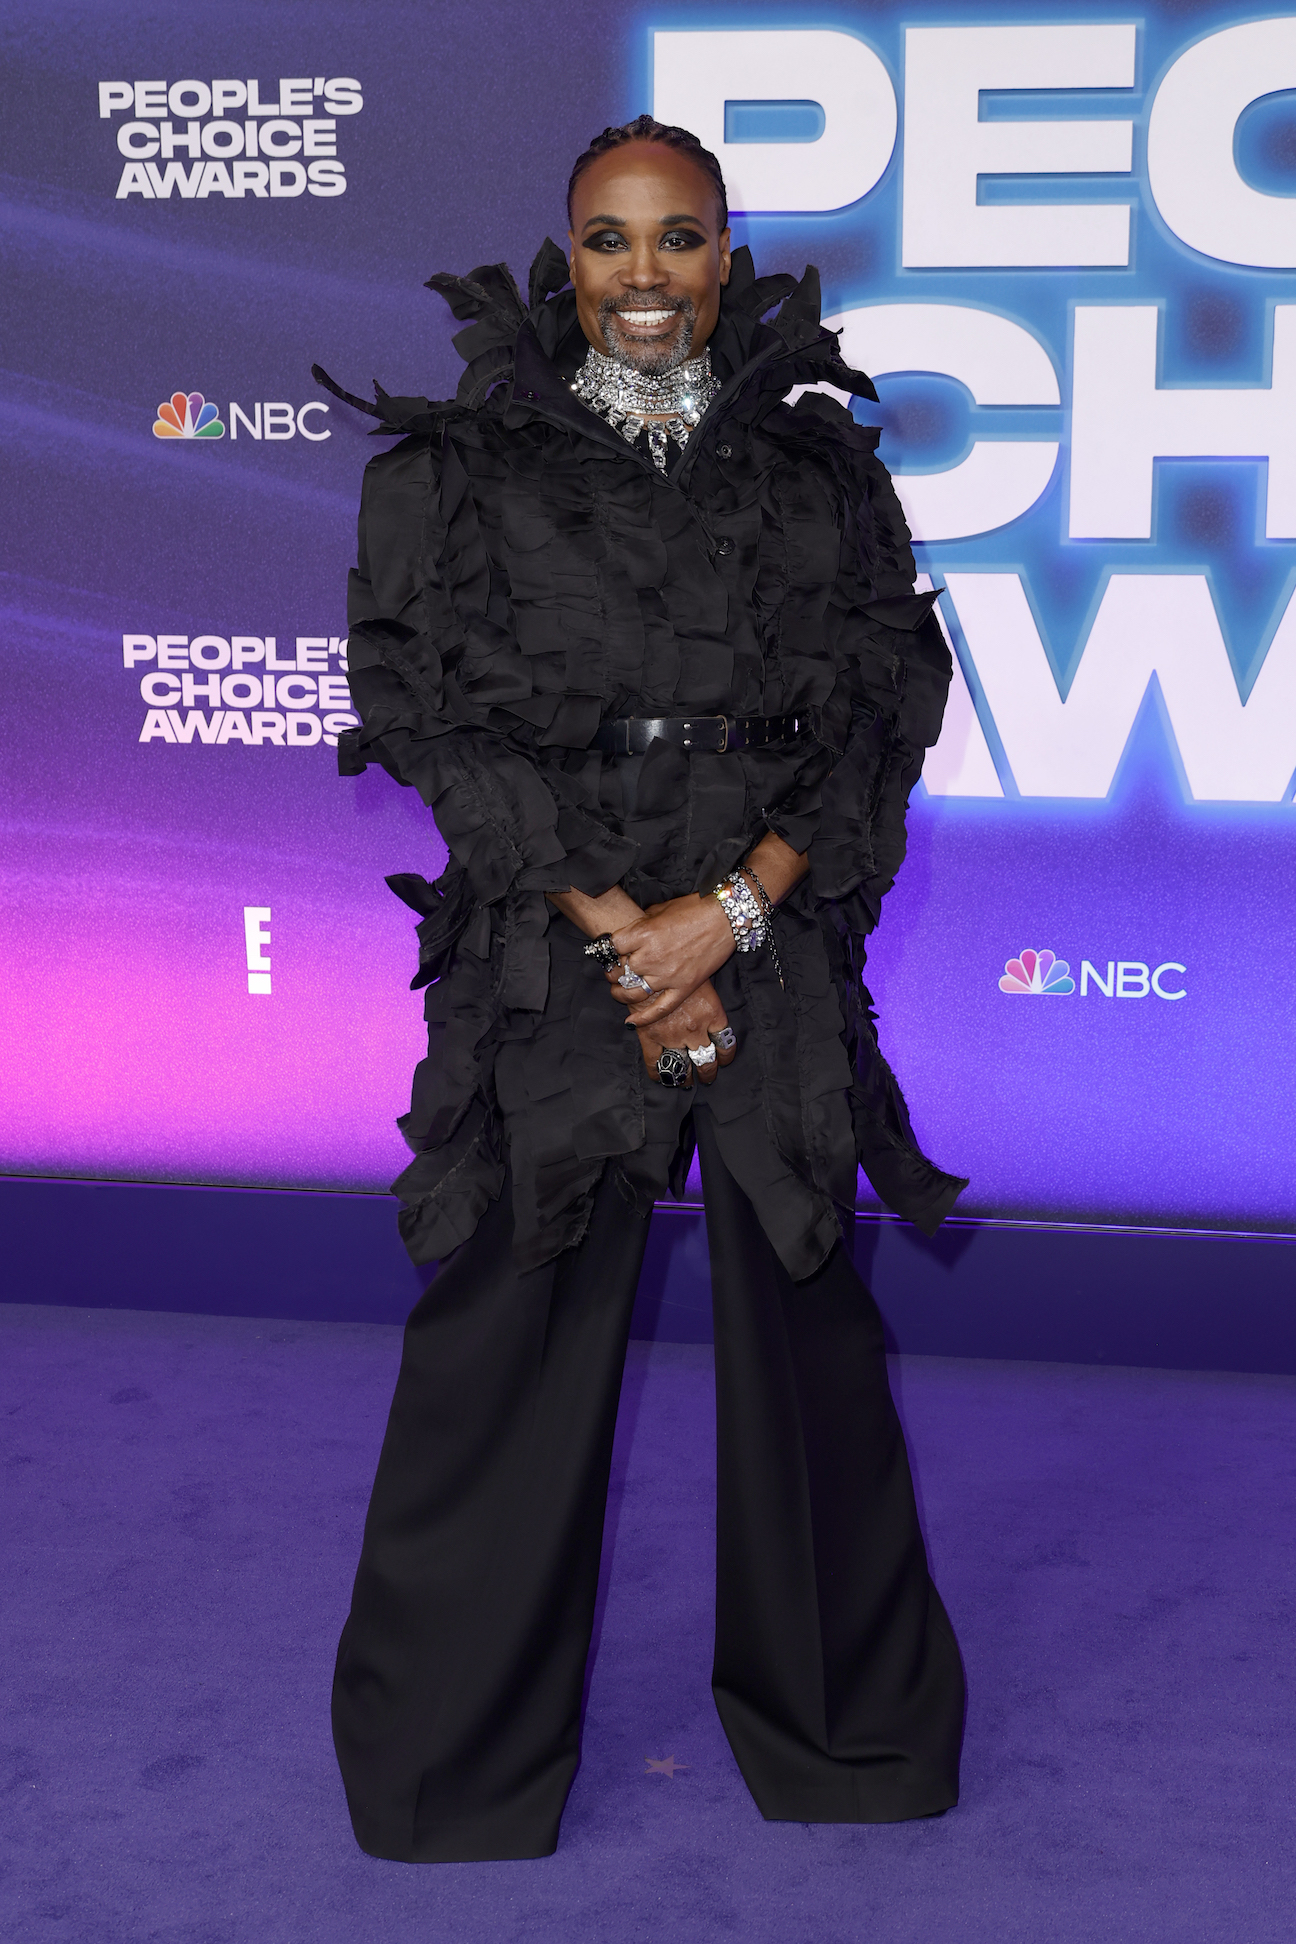  SANTA MONICA, CALIFORNIA - DECEMBER 06: Billy Porter attends the 2022 People's Choice Awards at Barker Hangar on December 06, 2022 in Santa Monica, California. (Photo by Frazer Harrison/WireImage)